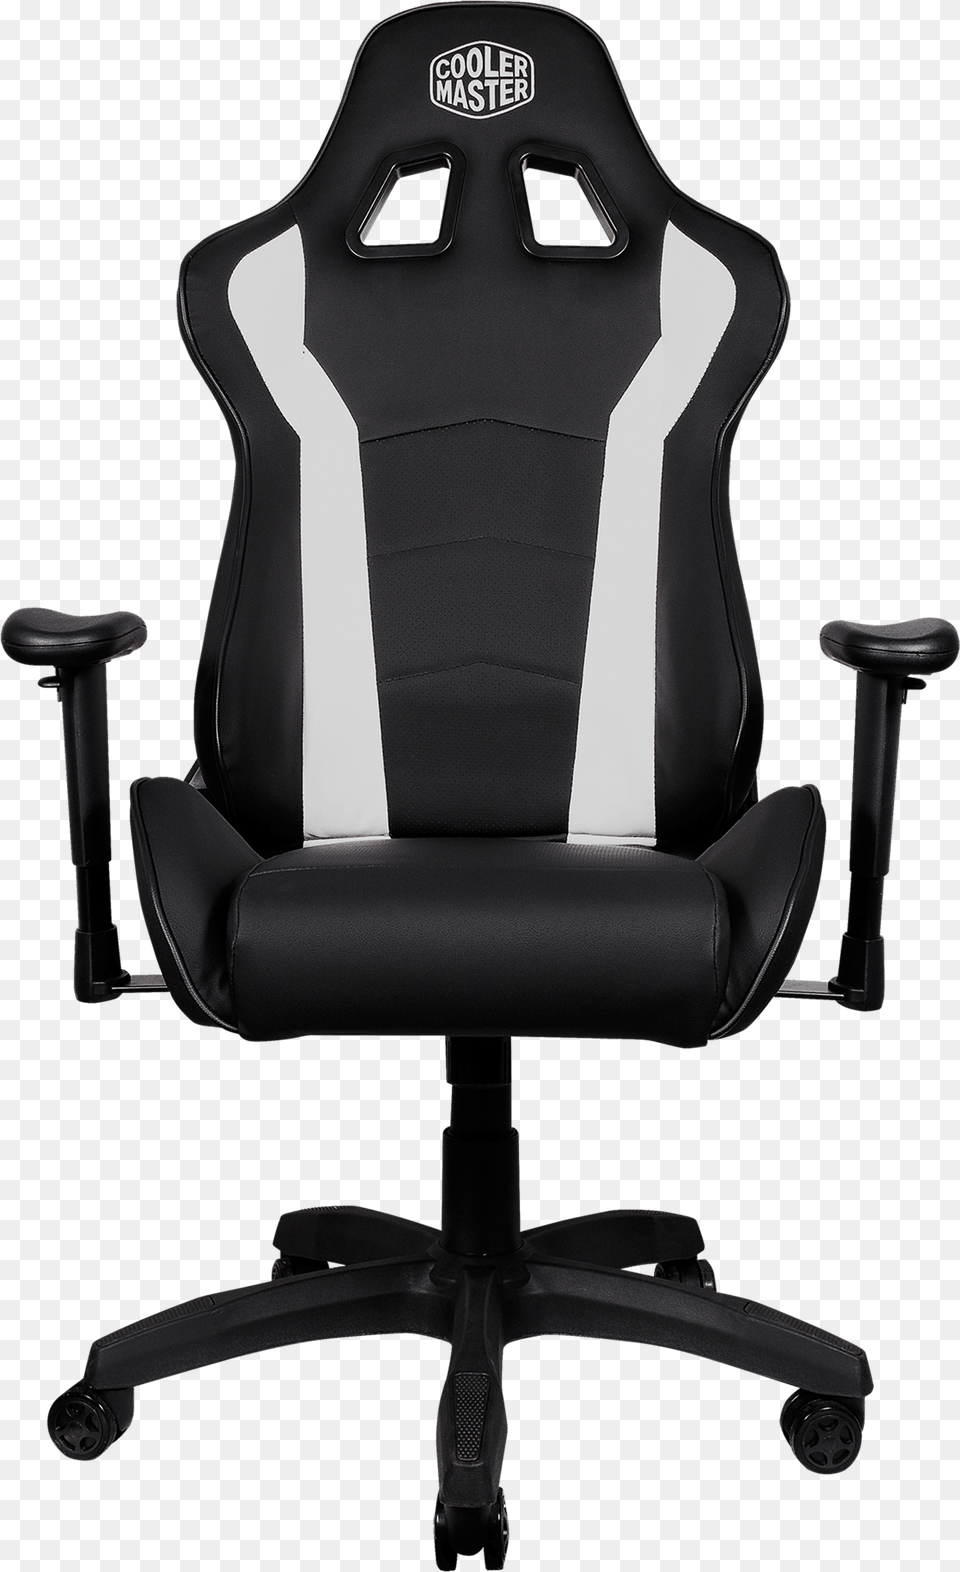 Cooler Master Gaming Chair Png Image